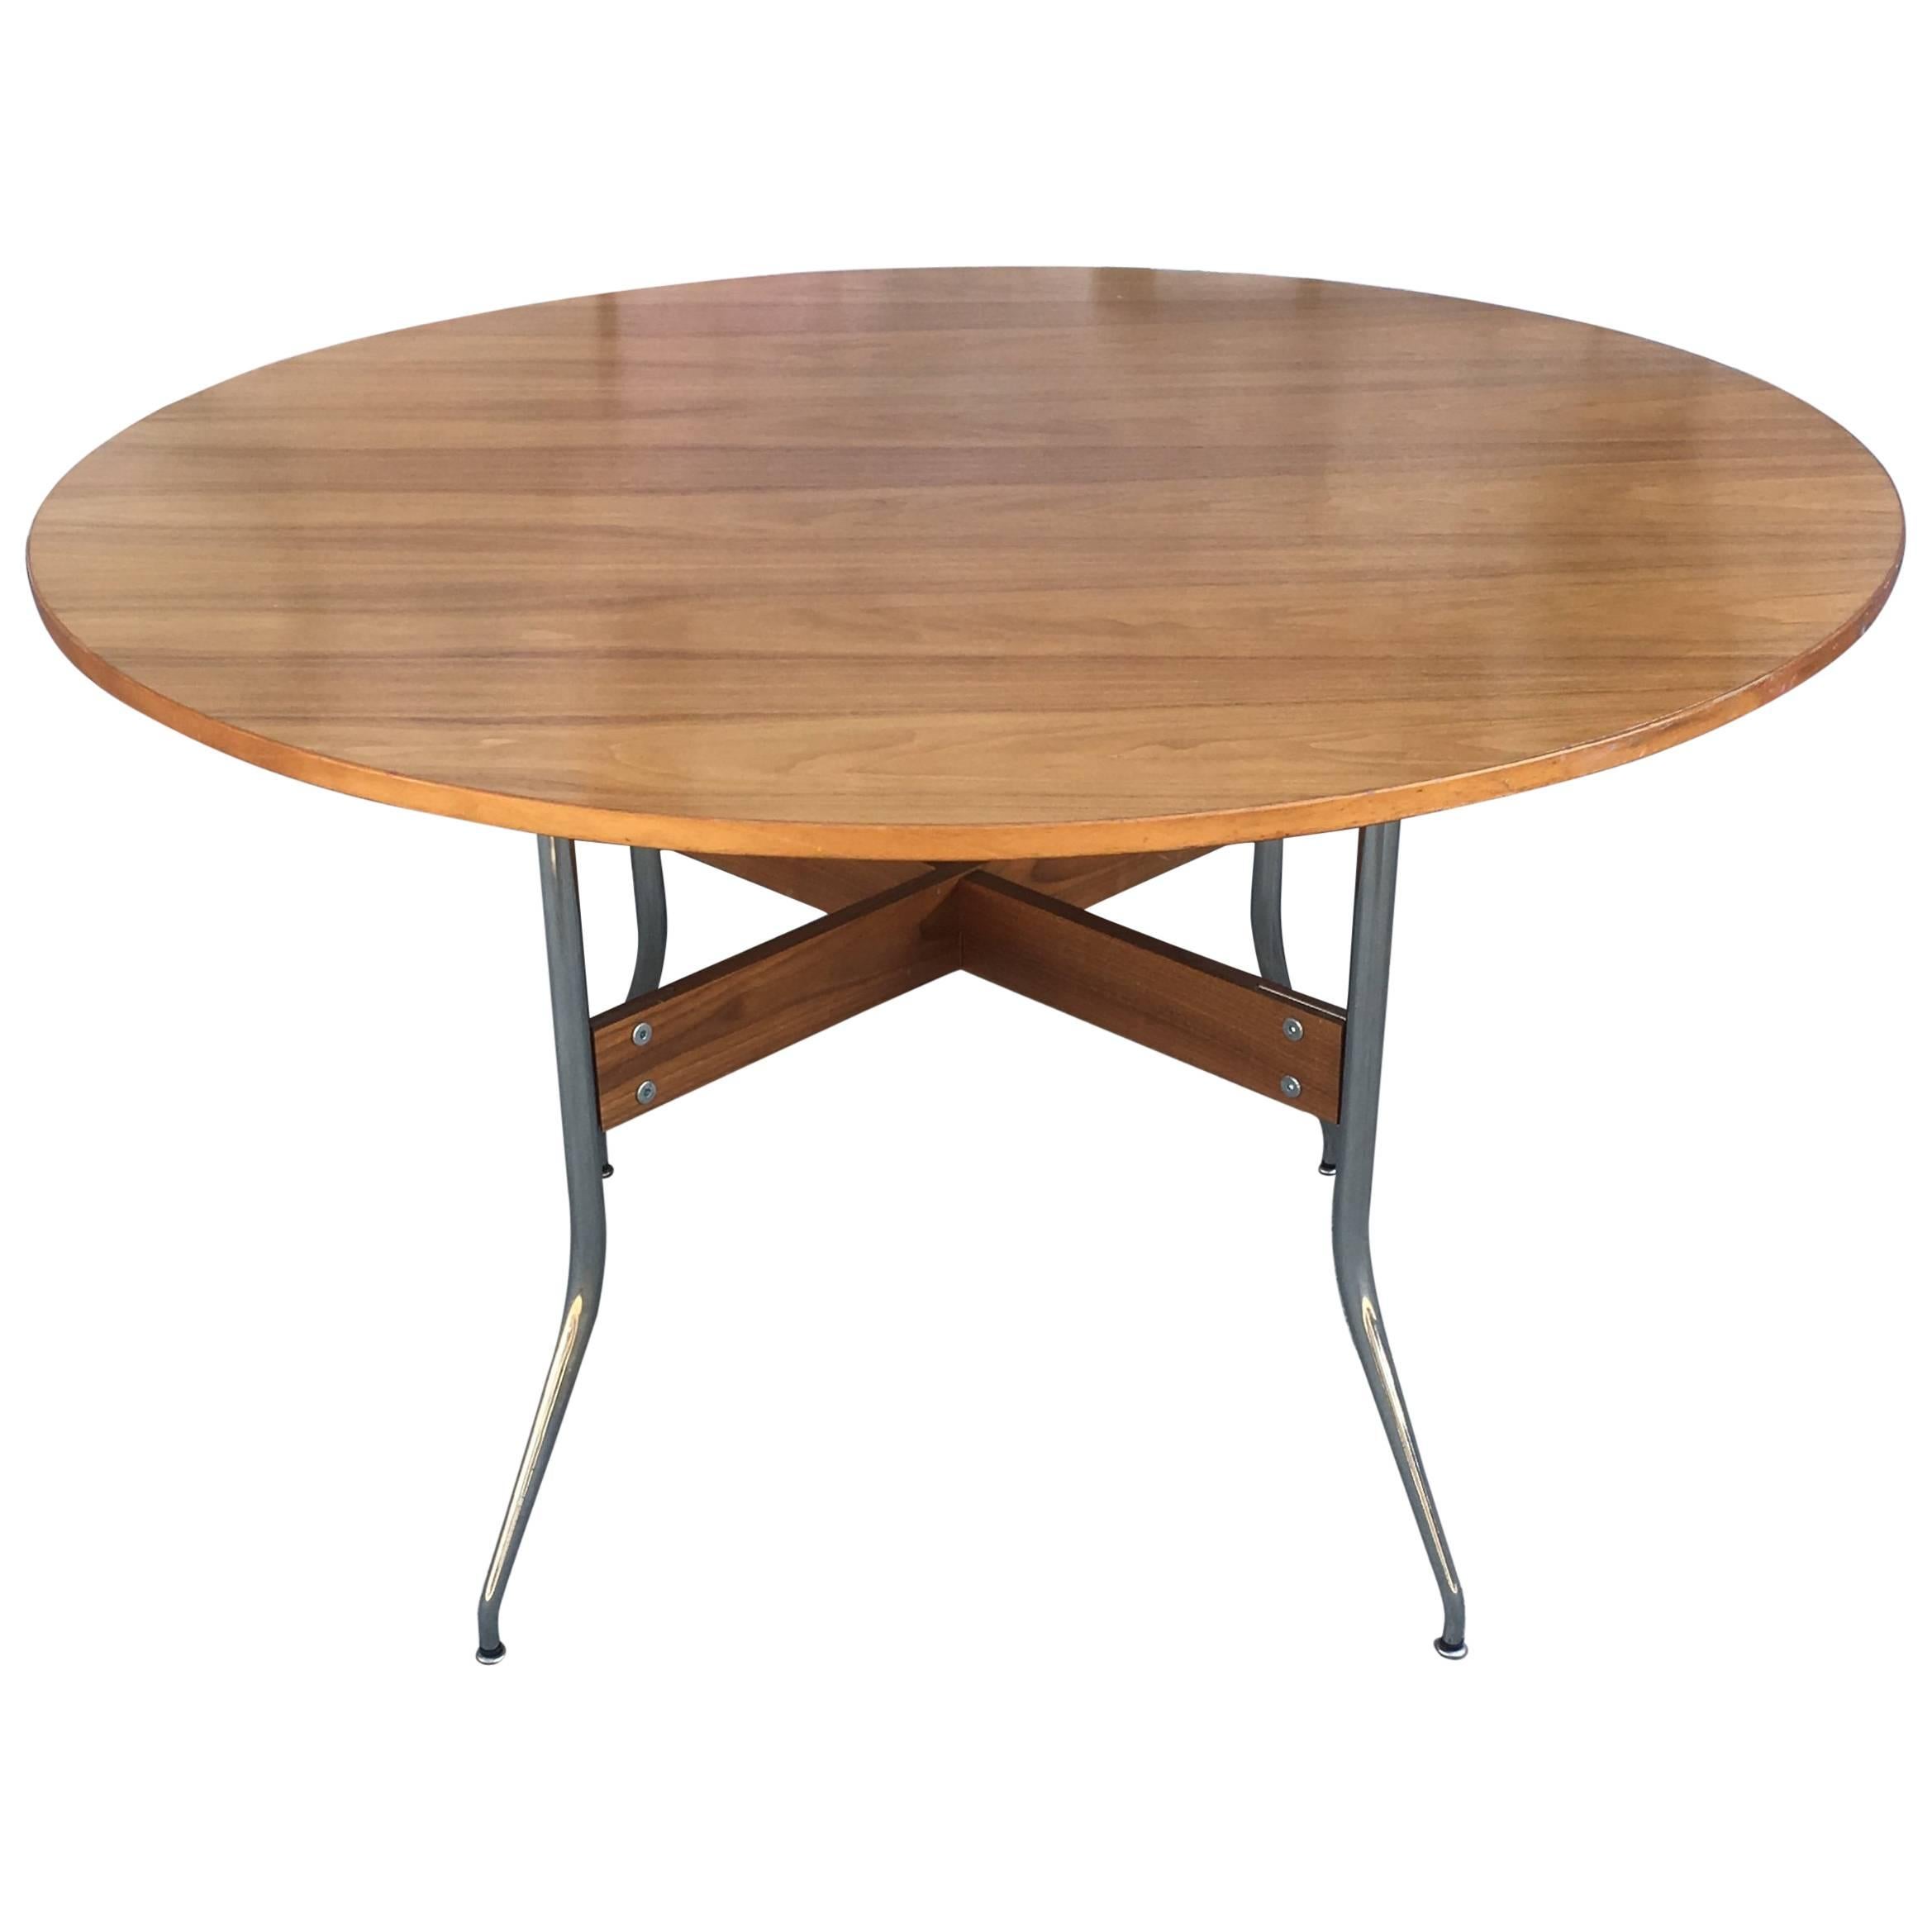 George Nelson for Herman Miller Swag Leg Walnut Dining Table